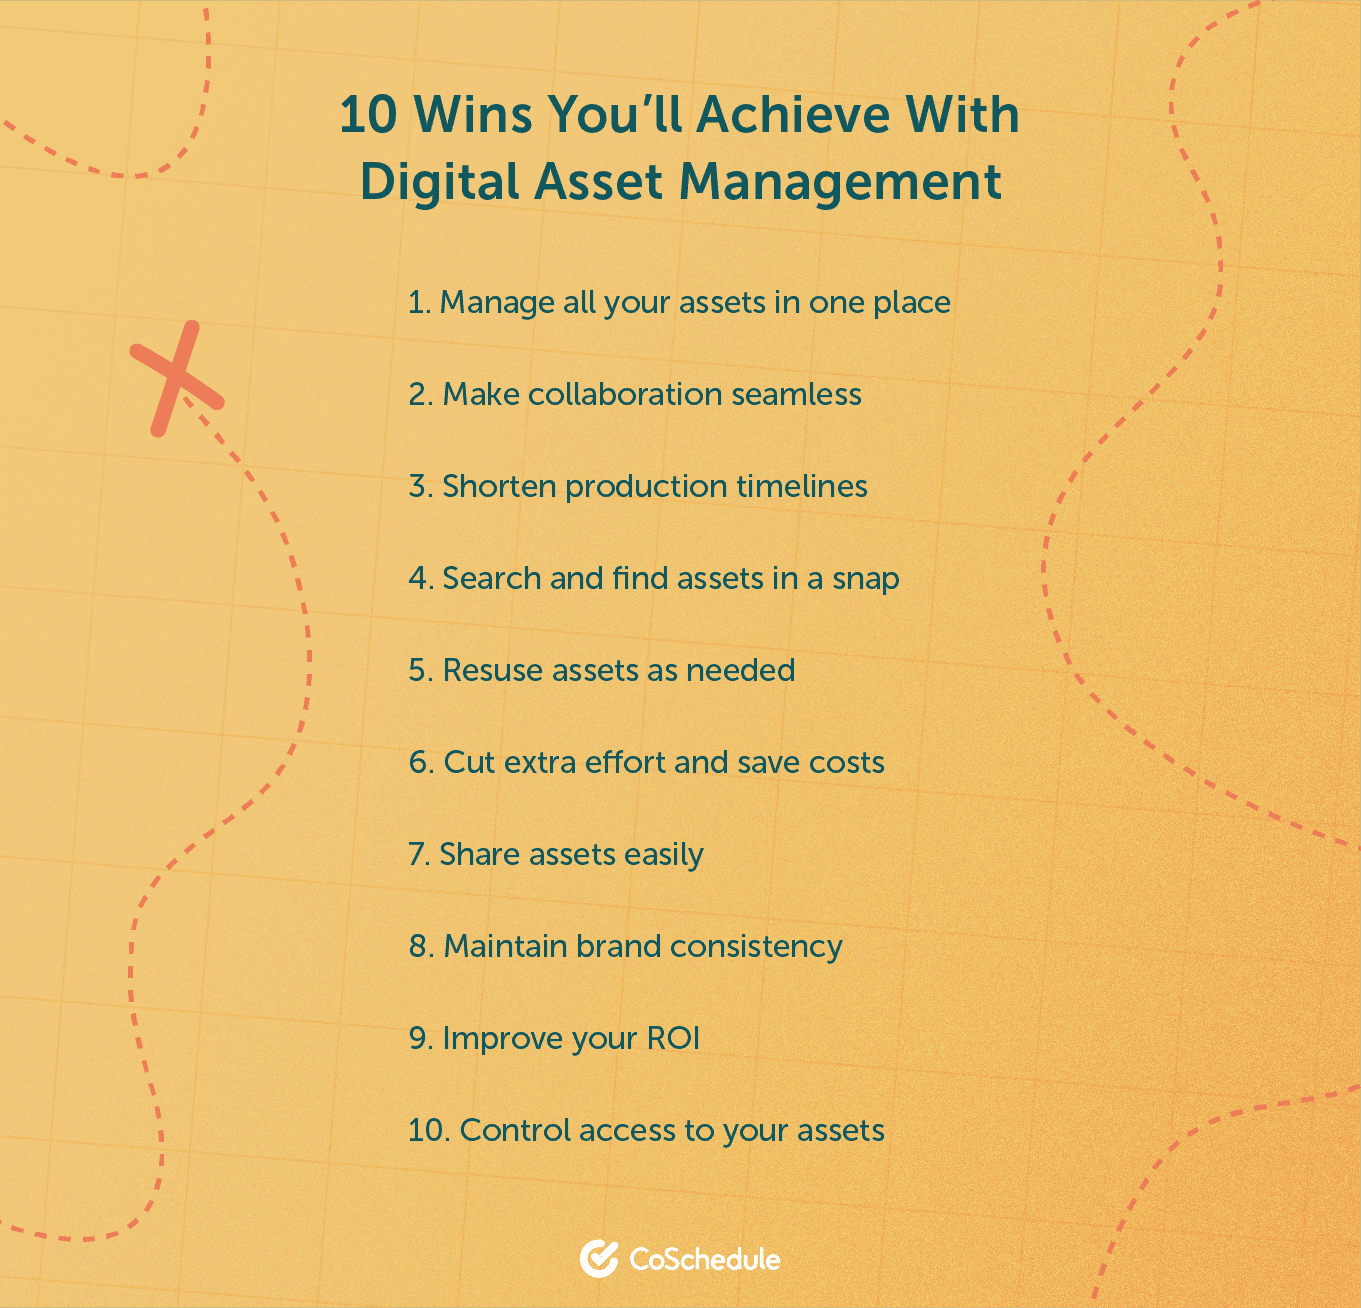 10 wins you'll achieve with digital asset management